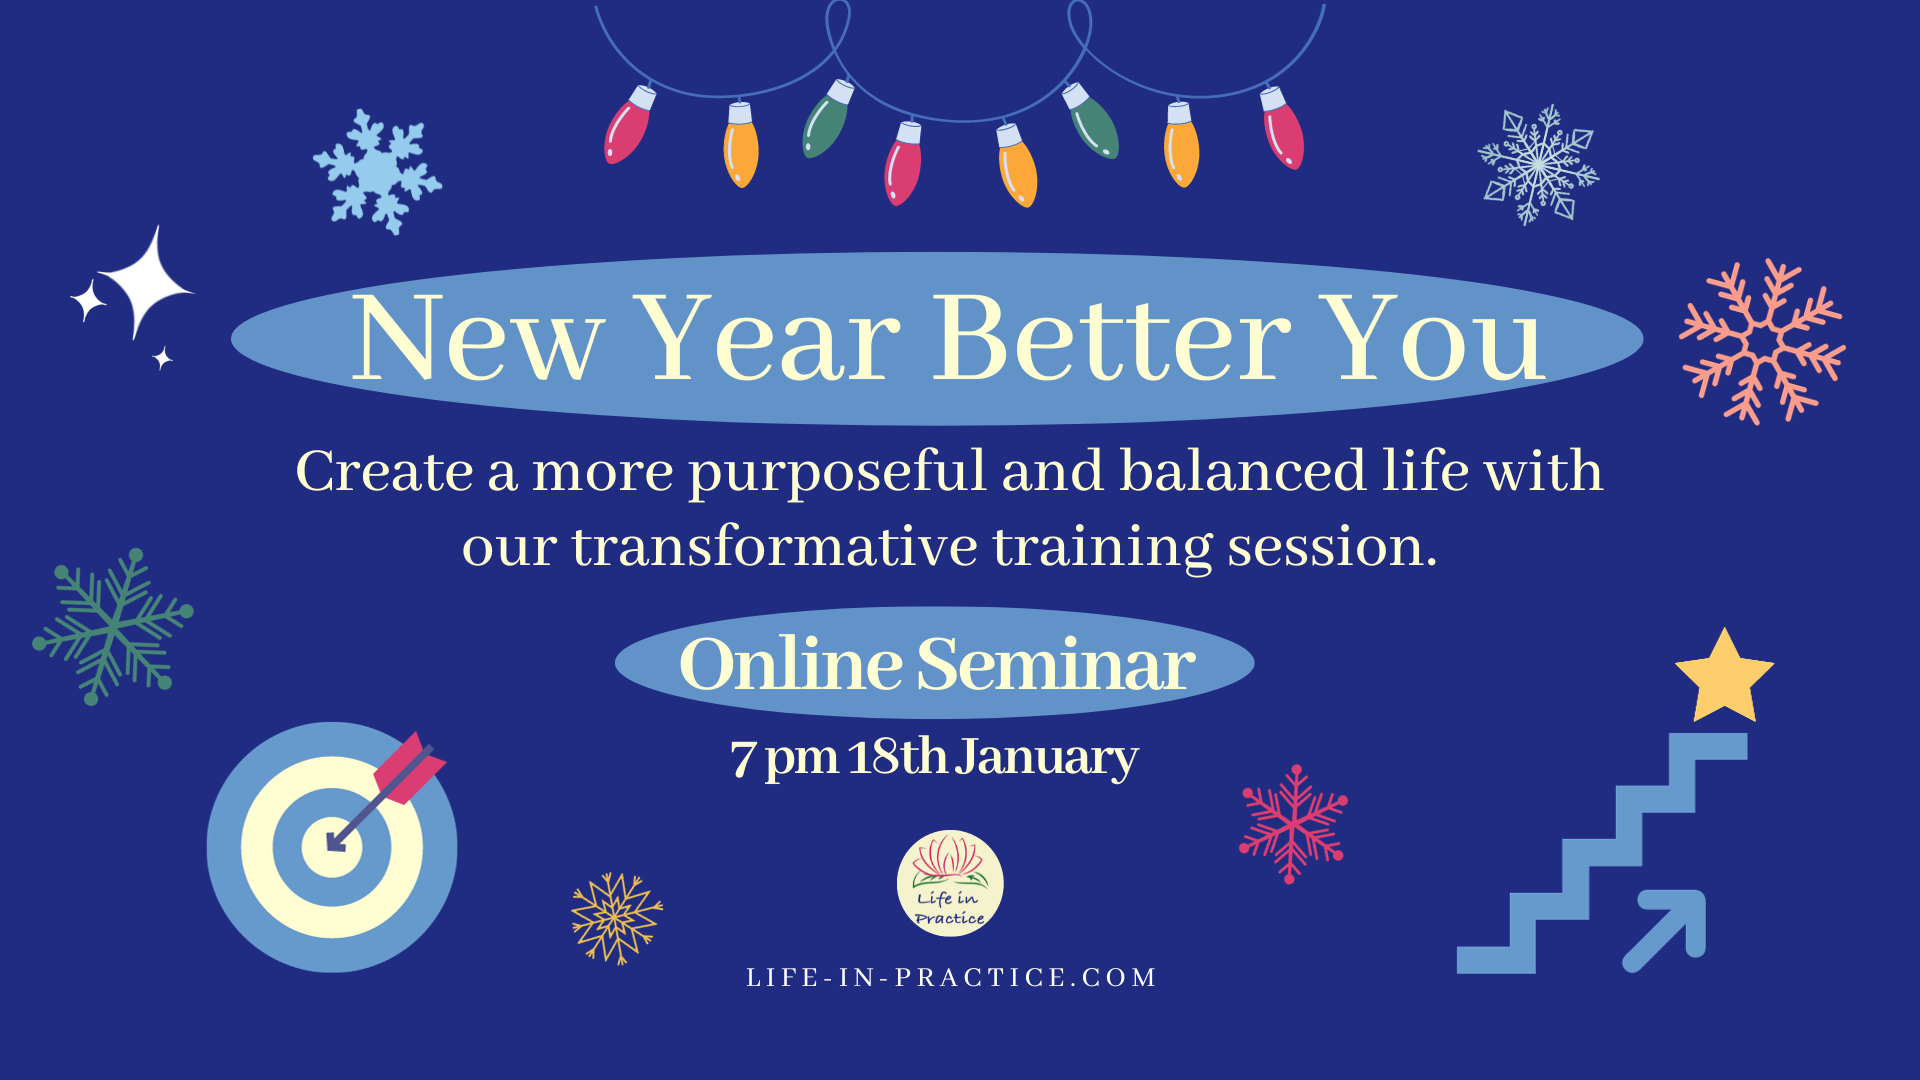 New Year Better You Online Seminar, Event